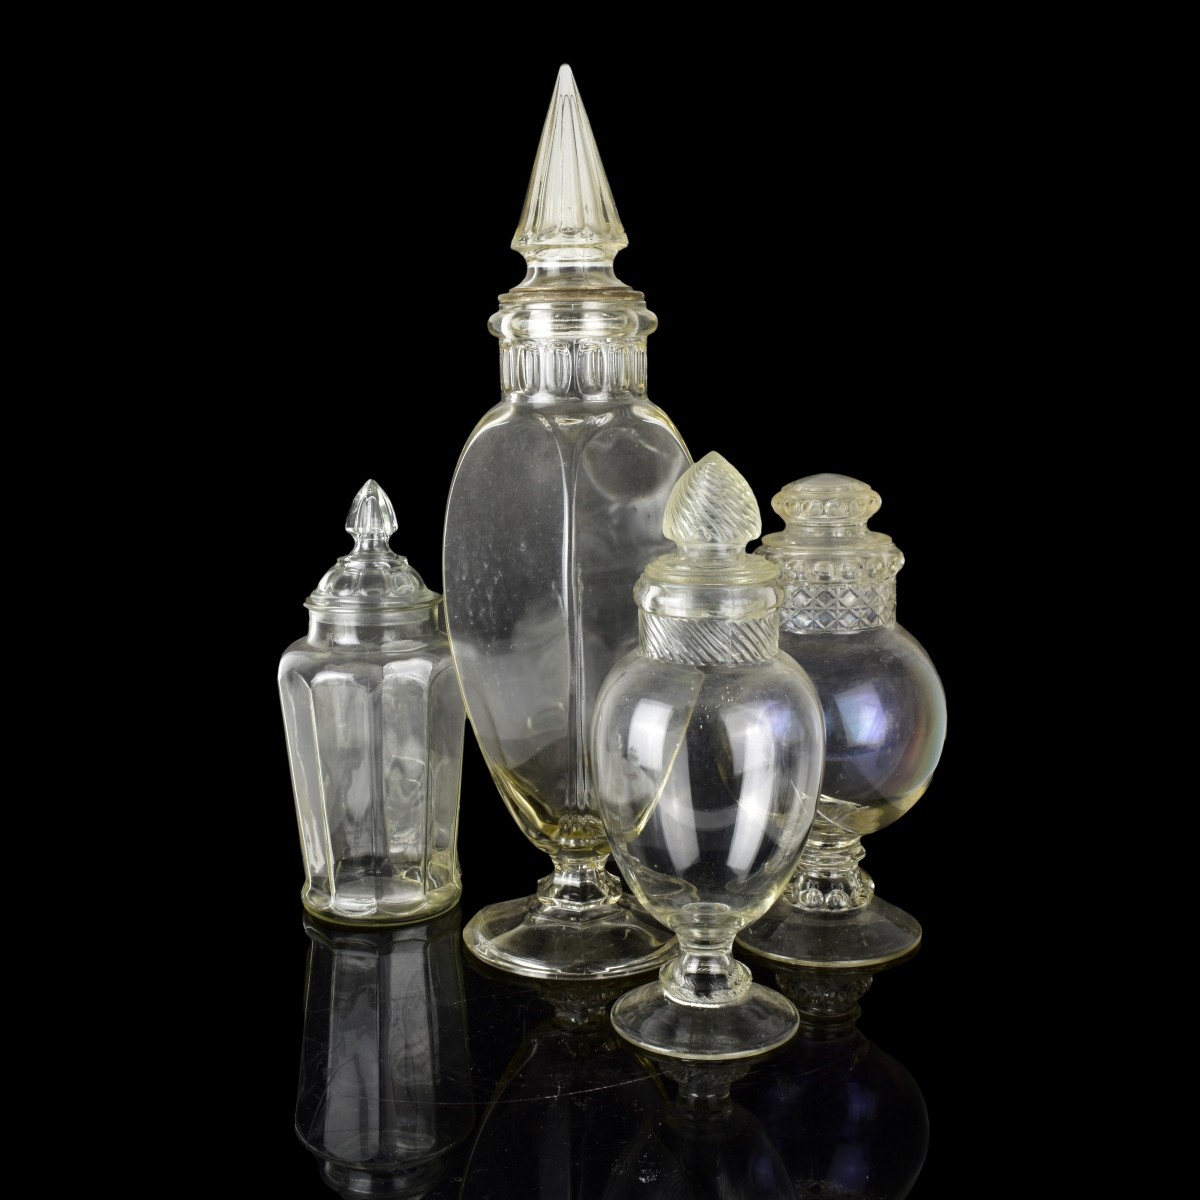 Seven Large Vintage Glass Apothecary Jars